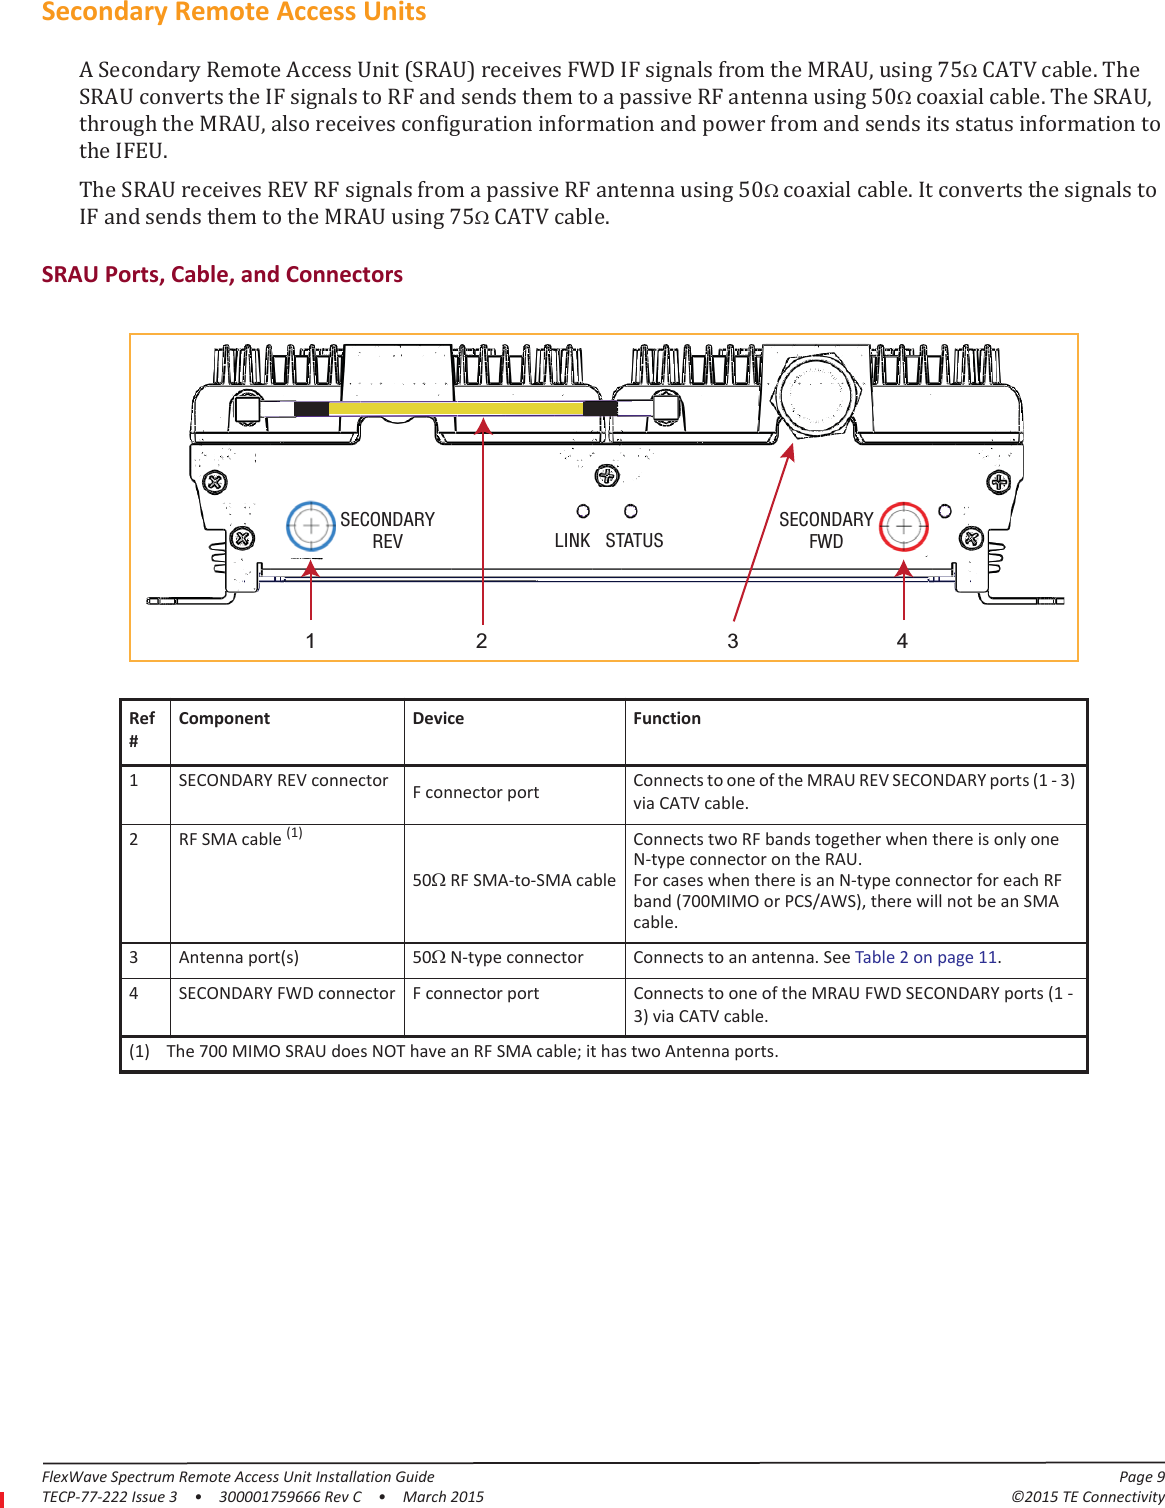 FlexWave Spectrum Remote Access Unit Installation Guide Page 9TECP-77-222 Issue 3  •  300001759666 Rev C  •  March 2015 ©2015 TE ConnectivitySecondary Remote Access UnitsA Secondary Remote Access Unit (SRAU) receives FWD IF signals from the MRAU, using 75 CATV cable. The SRAU converts the IF signals to RF and sends them to a passive RF antenna using 50 coaxial cable. The SRAU, through the MRAU, also receives configuration information and power from and sends its status information to the IFEU.The SRAU receives REV RF signals from a passive RF antenna using 50 coaxial cable. It converts the signals to IF and sends them to the MRAU using 75 CATV cable. SRAU Ports, Cable, and Connectors1423LINK STATUSSECONDARYREVSECONDARYFWDSECONDARYREVSECONDARYFWDLINK STATUSRef #Component Device Function1 SECONDARY REV connector F connector port Connects to one of the MRAU REV SECONDARY ports (1 - 3) via CATV cable.2 RF SMA cable (1) 50 RF SMA-to-SMA cableConnects two RF bands together when there is only one N-type connector on the RAU.For cases when there is an N-type connector for each RF band (700MIMO or PCS/AWS), there will not be an SMA cable.3 Antenna port(s) 50 N-type connector Connects to an antenna. See Table  2 on page  11.4 SECONDARY FWD connector F connector port Connects to one of the MRAU FWD SECONDARY ports (1 - 3) via CATV cable.(1) The 700 MIMO SRAU does NOT have an RF SMA cable; it has two Antenna ports.